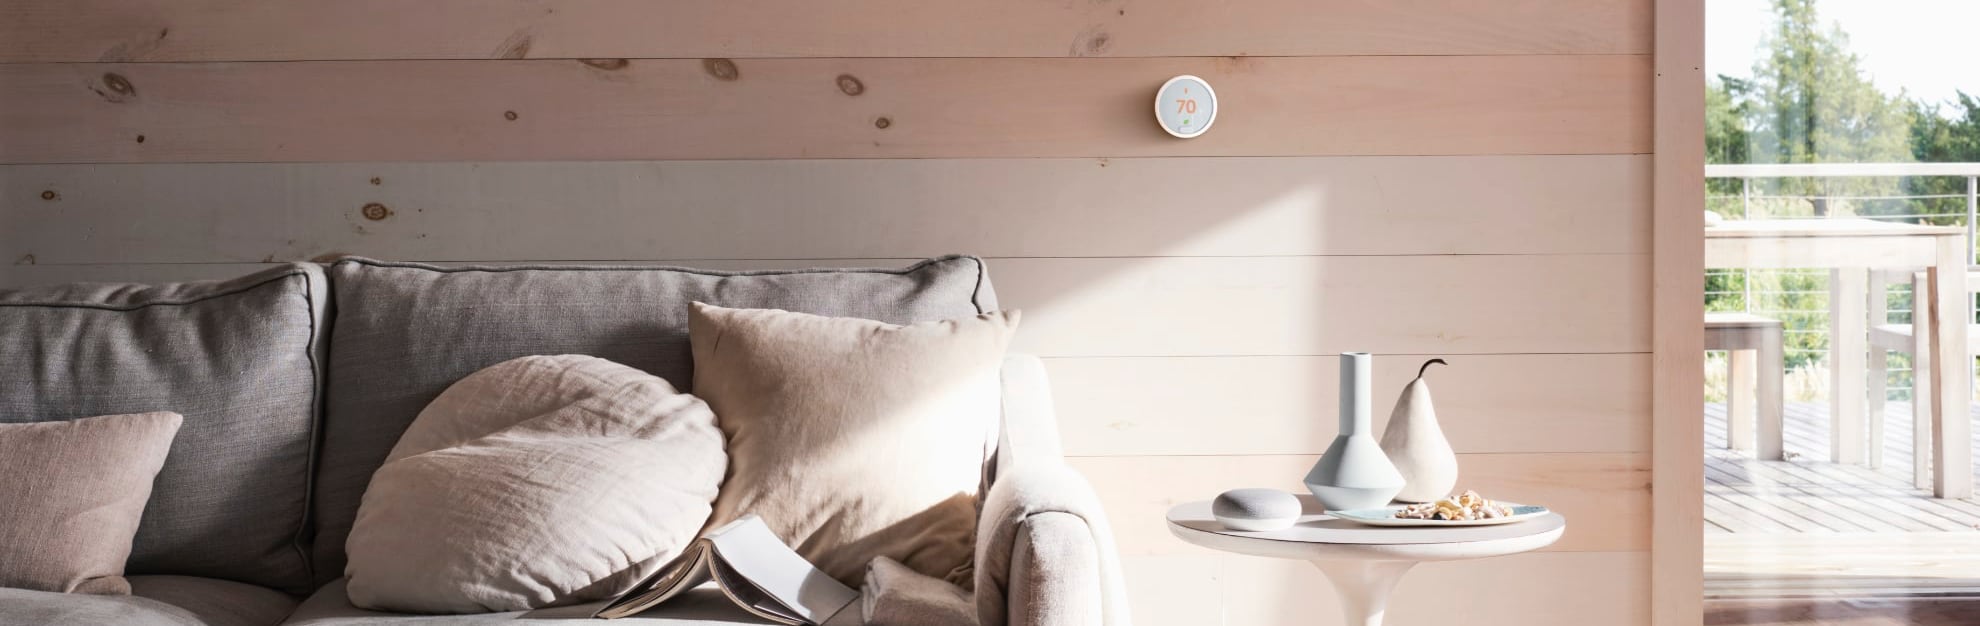 Vivint Home Automation in Bloomington